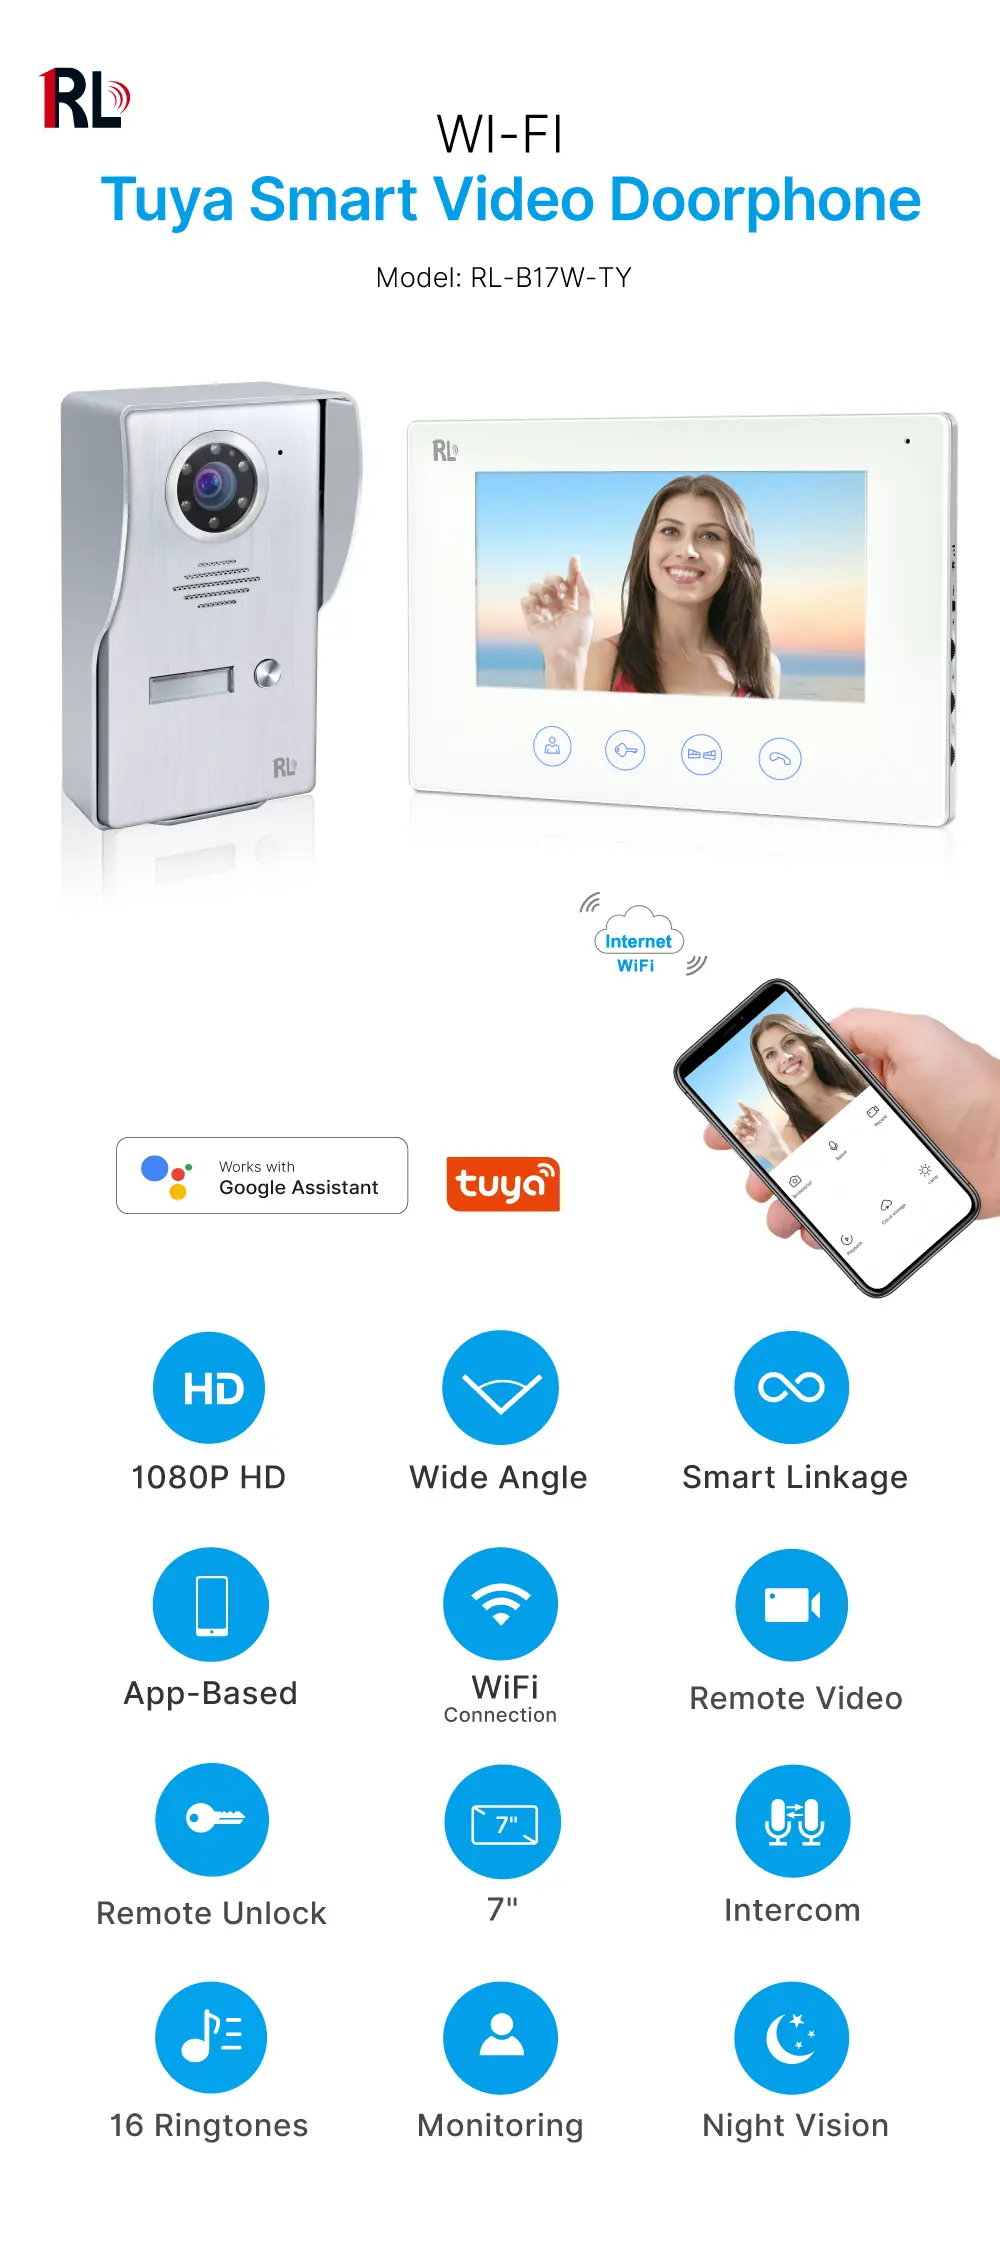 7 inch TUYA WIFI Smart Video Doorphone- Easy 4-wire connection- Between indoor & outdoor units See, hear and speak to visitors from anywhere 1080P AHD Doorbell - Built-in Mega HD camera - Suitable for various environment and outdoor use- Night Vision camera _01